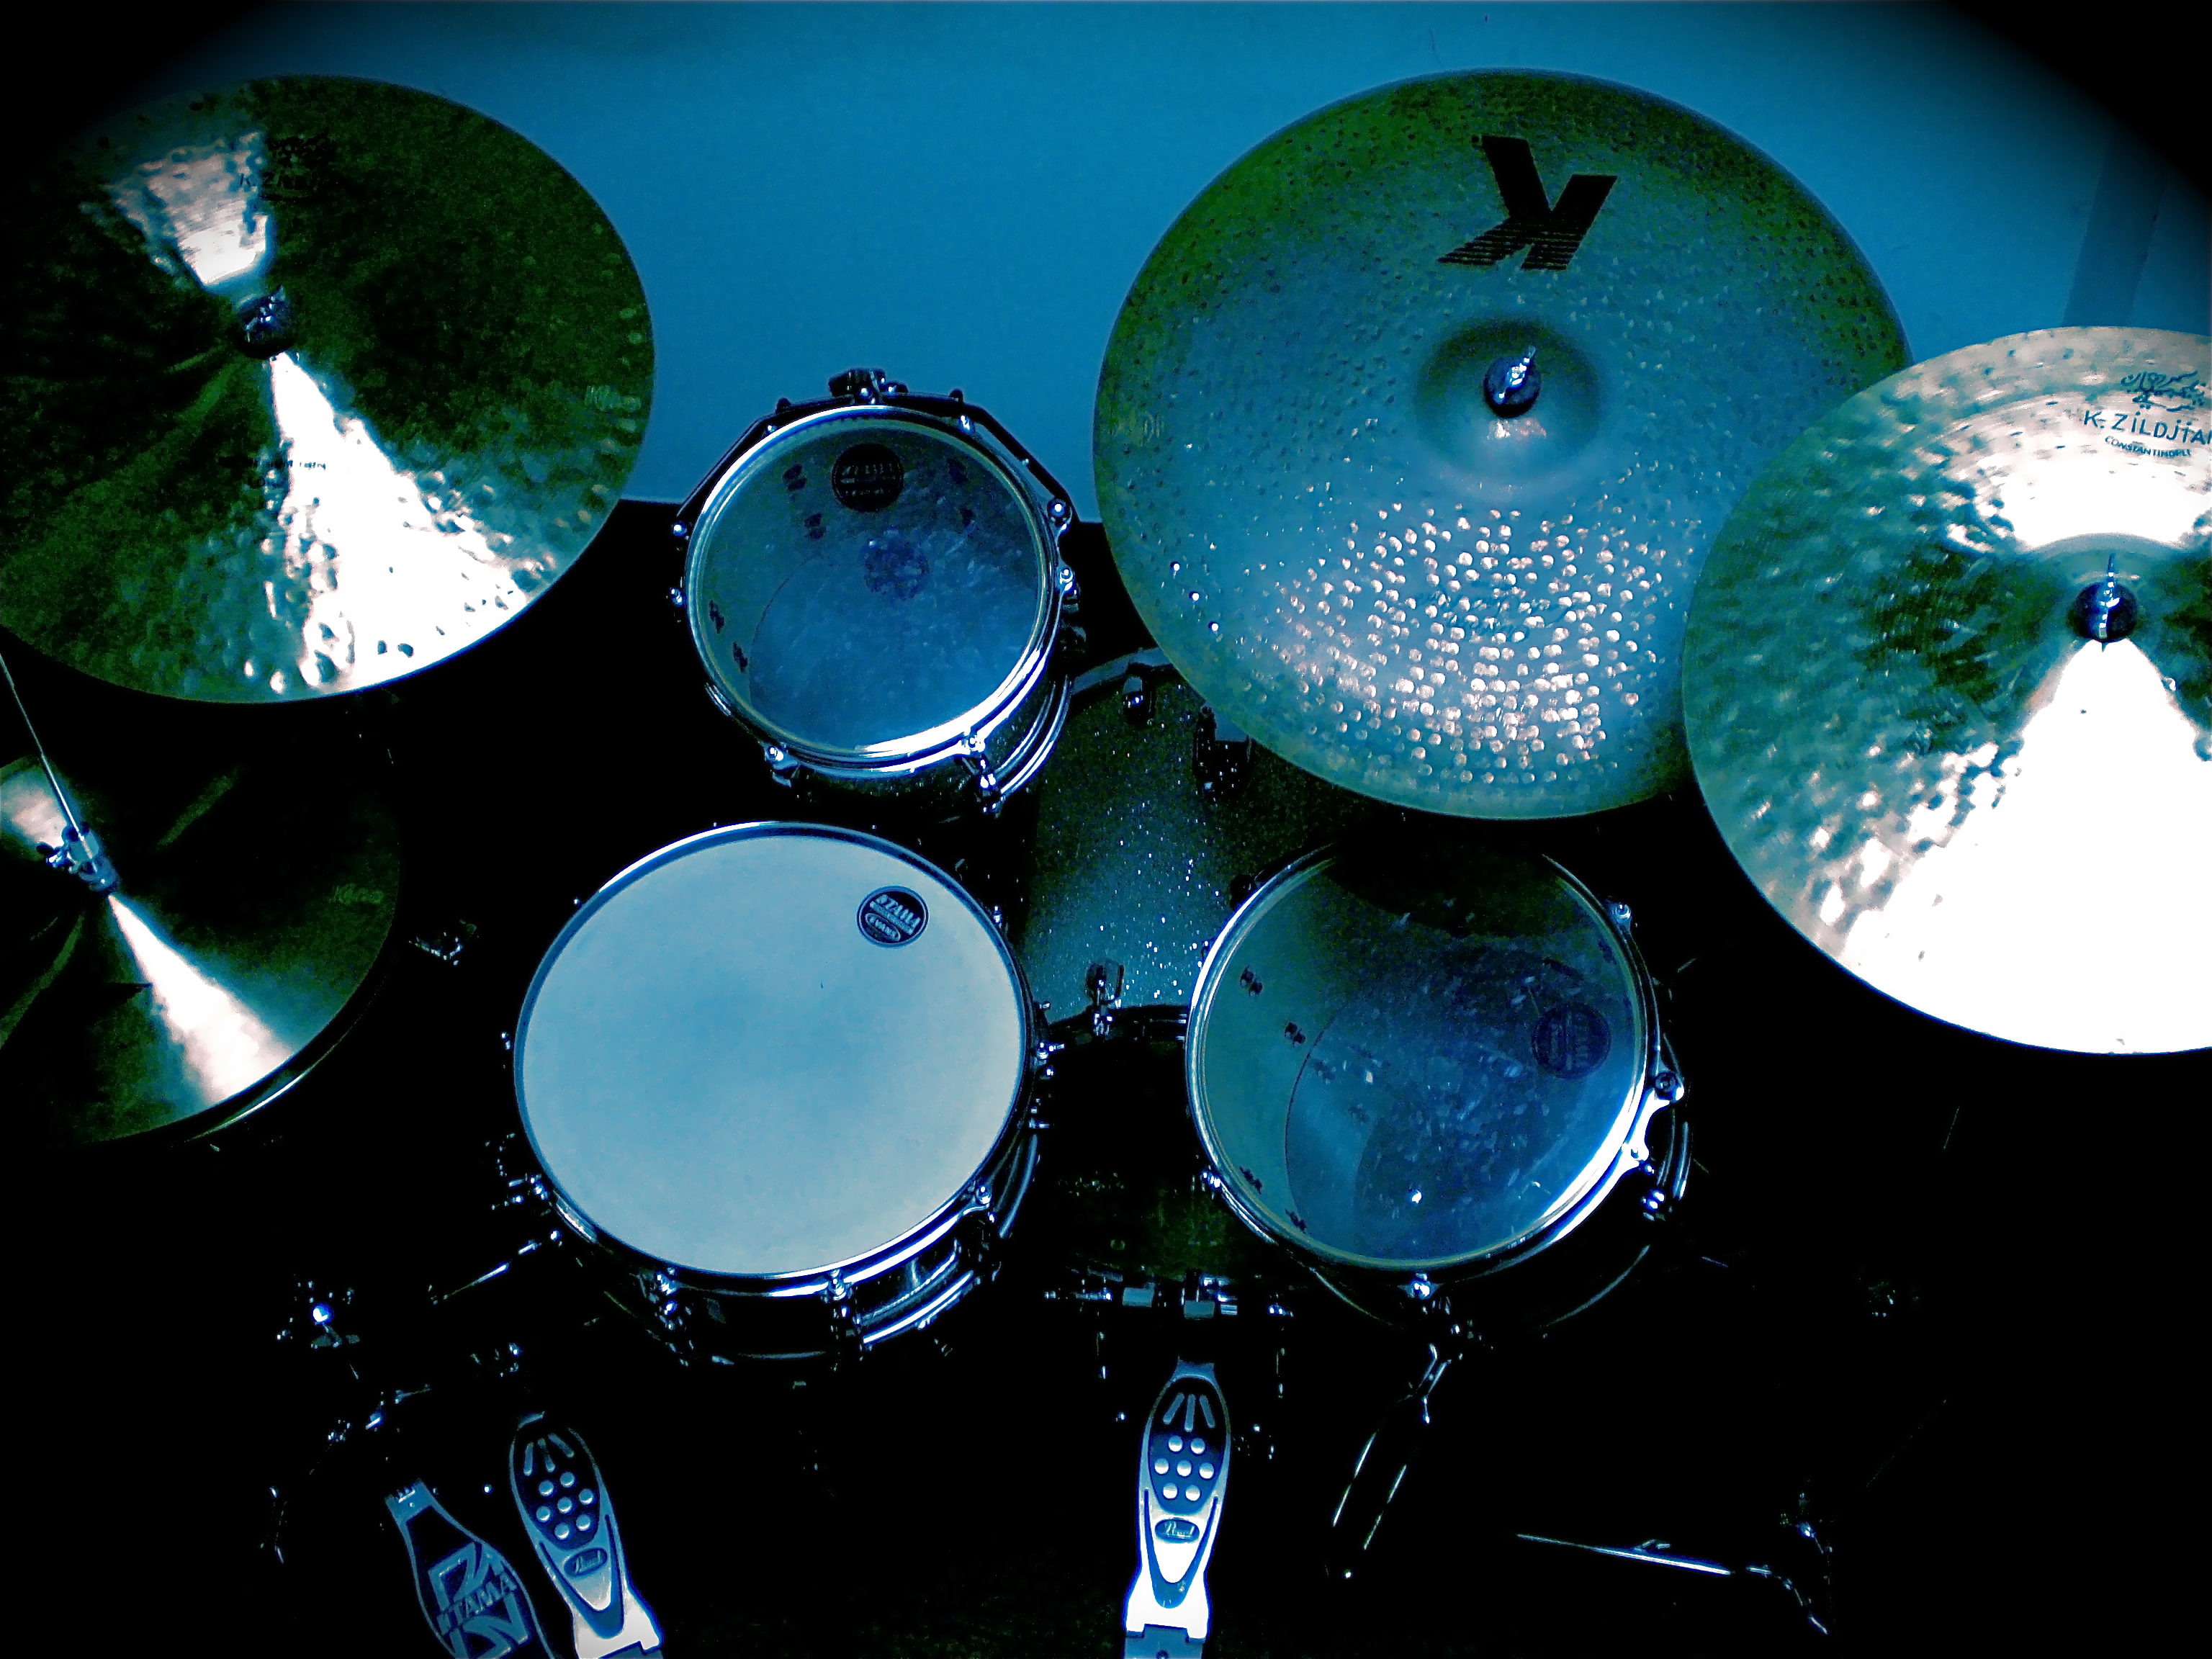 Drum Kit Background Images HD Pictures and Wallpaper For Free Download   Pngtree